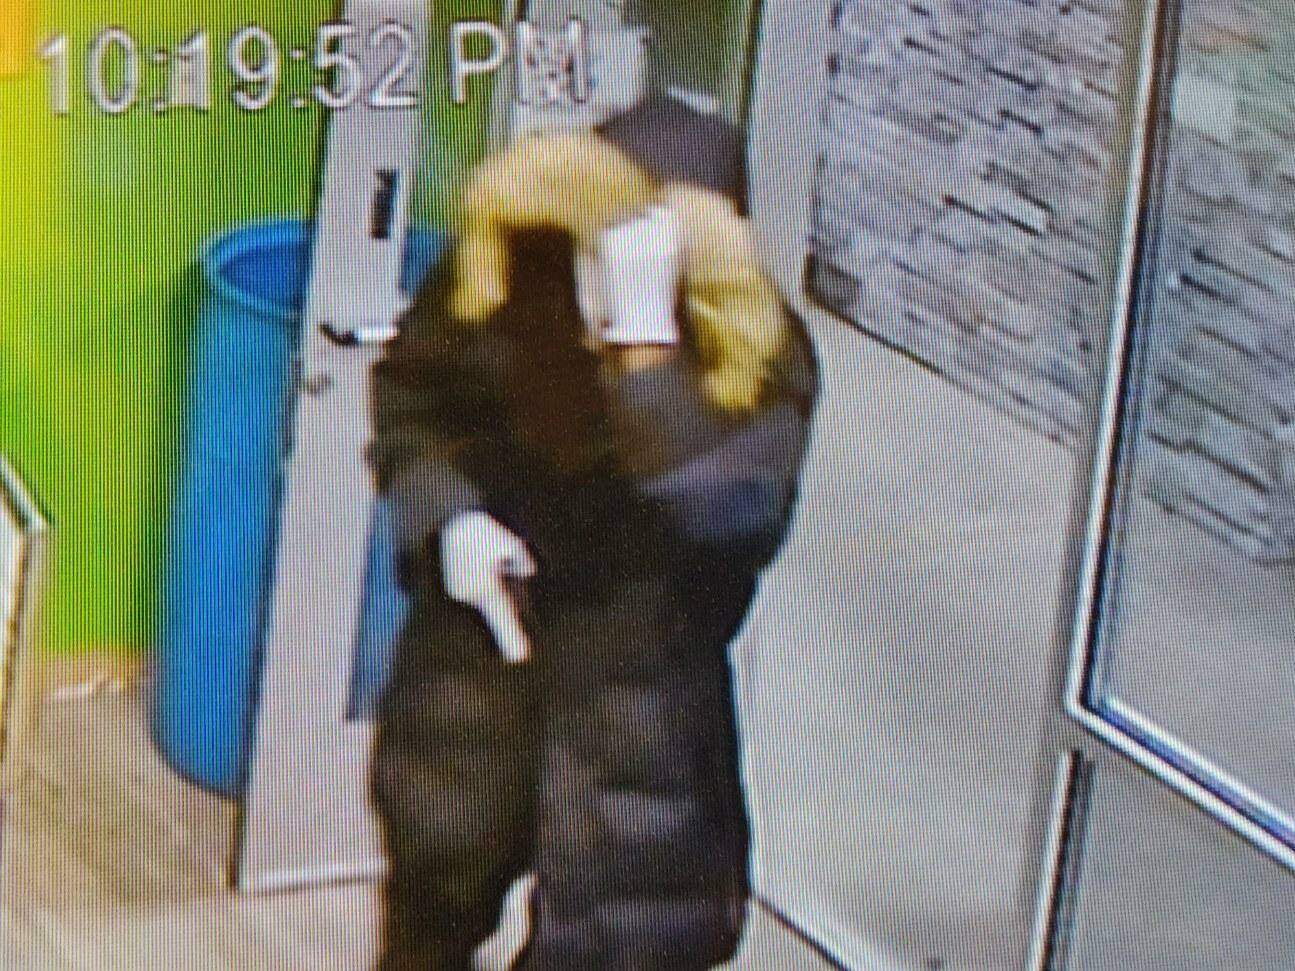 Surveillance video shows one of the robbers entering Kitsap Cannabis while appearing to draw a weapon. Courtesy Photos